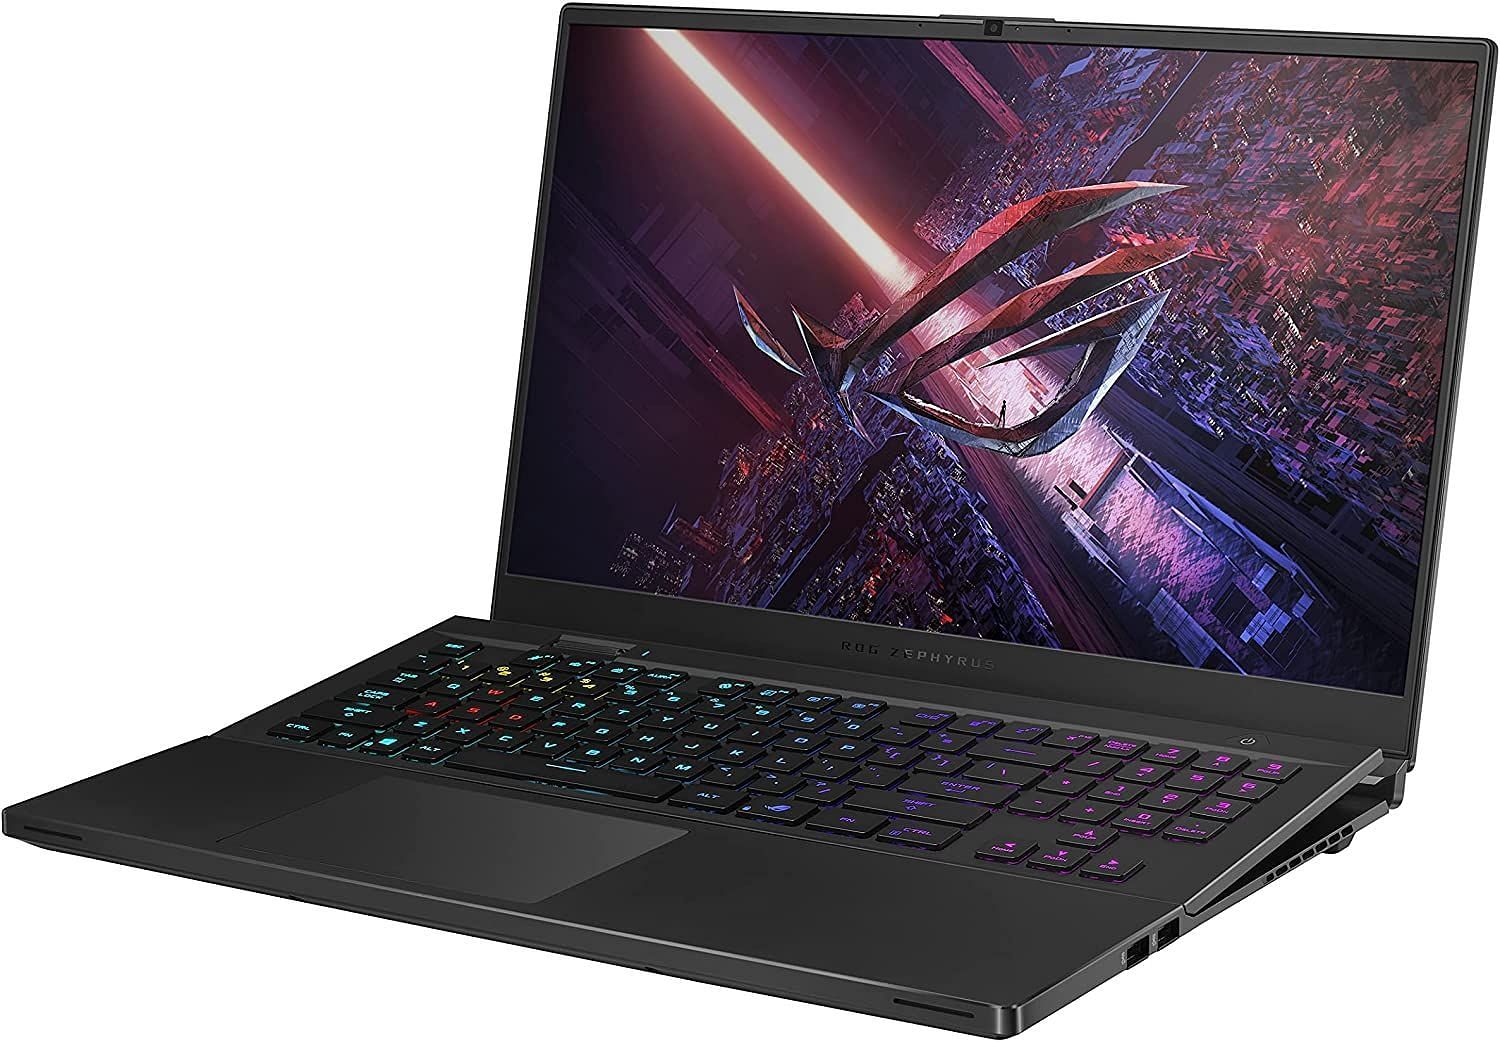 ASUS ROG Zephyrus S17 has a unique look that can&#039;t be found on any other laptop (Image via Amazon)